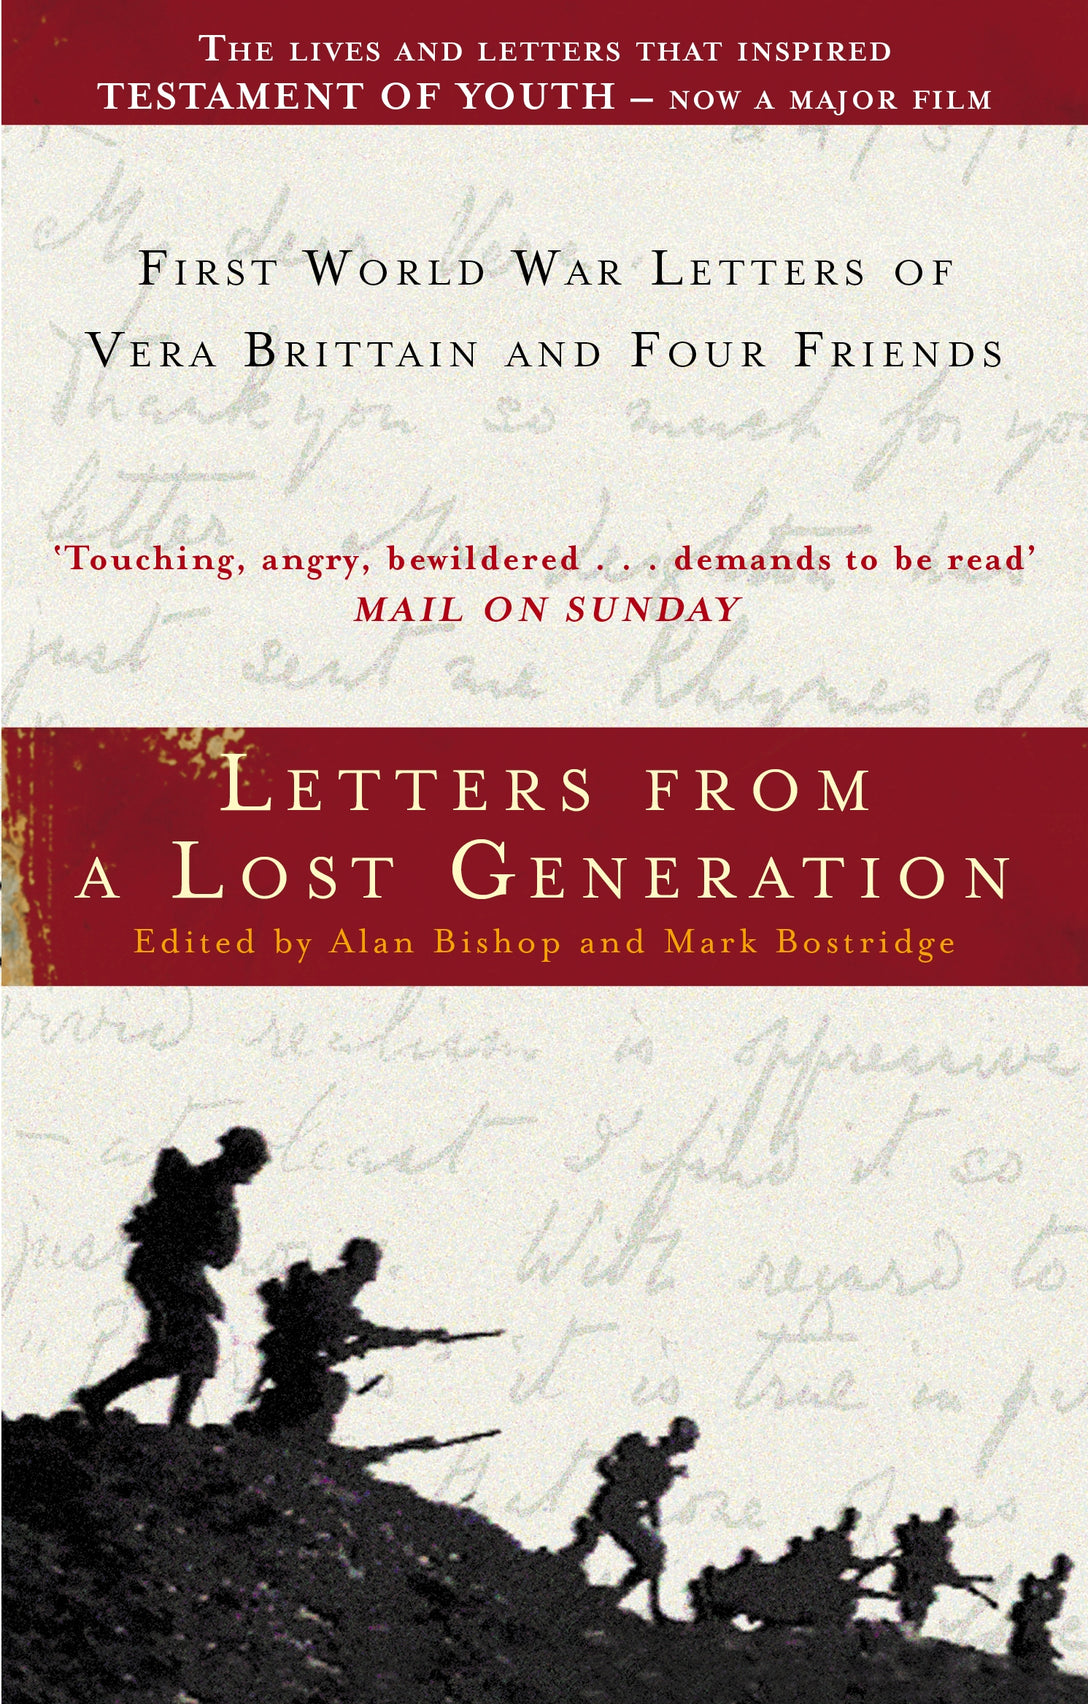 Letters From A Lost Generation by Mark Bostridge, Alan Bishop, Mark Bostridge, Mark Bostridge, Alan Bishop